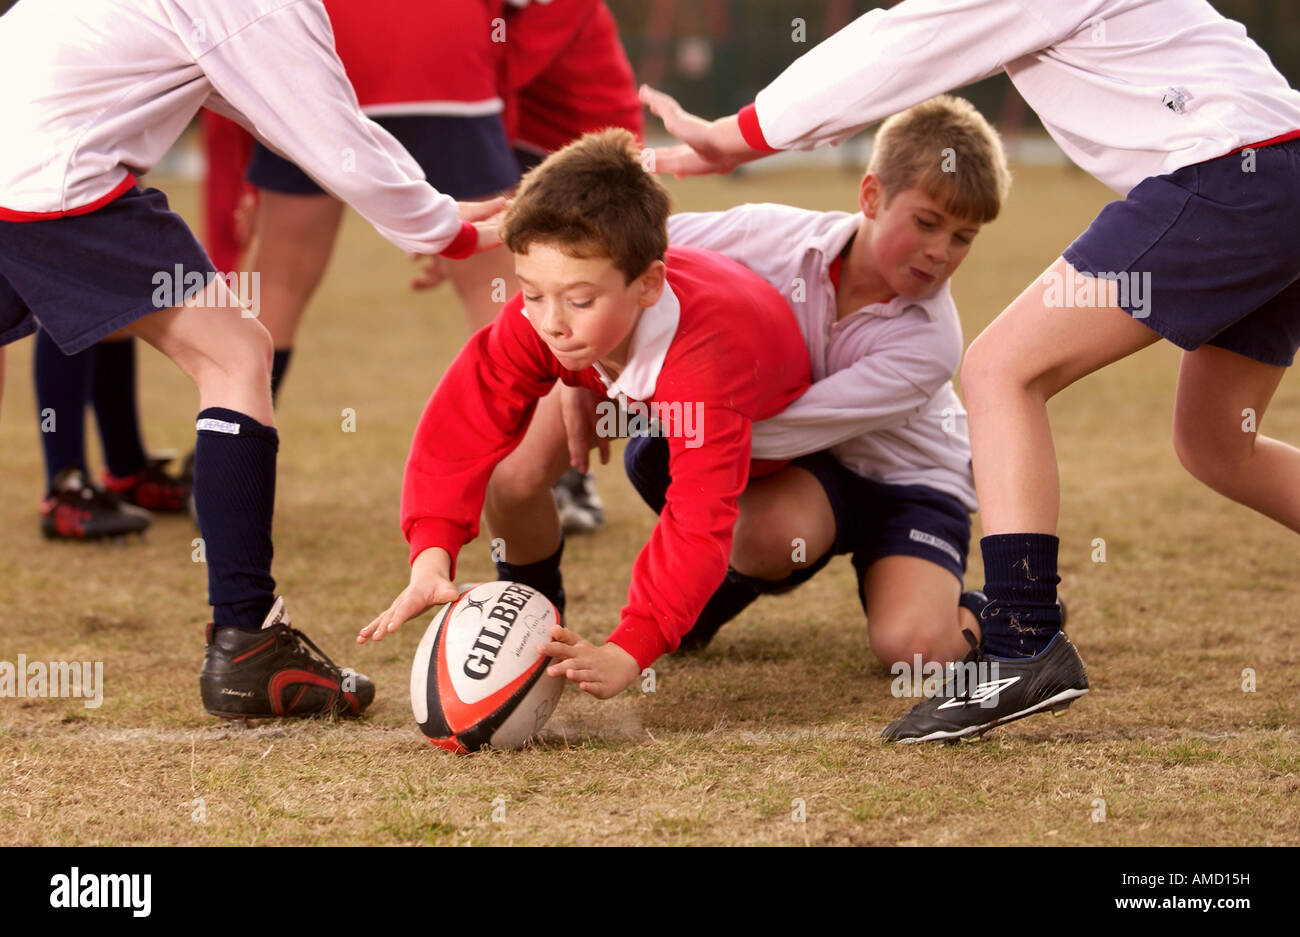 SCORING A TRY IN A BOYS RUGBY MATCH Stock Photo